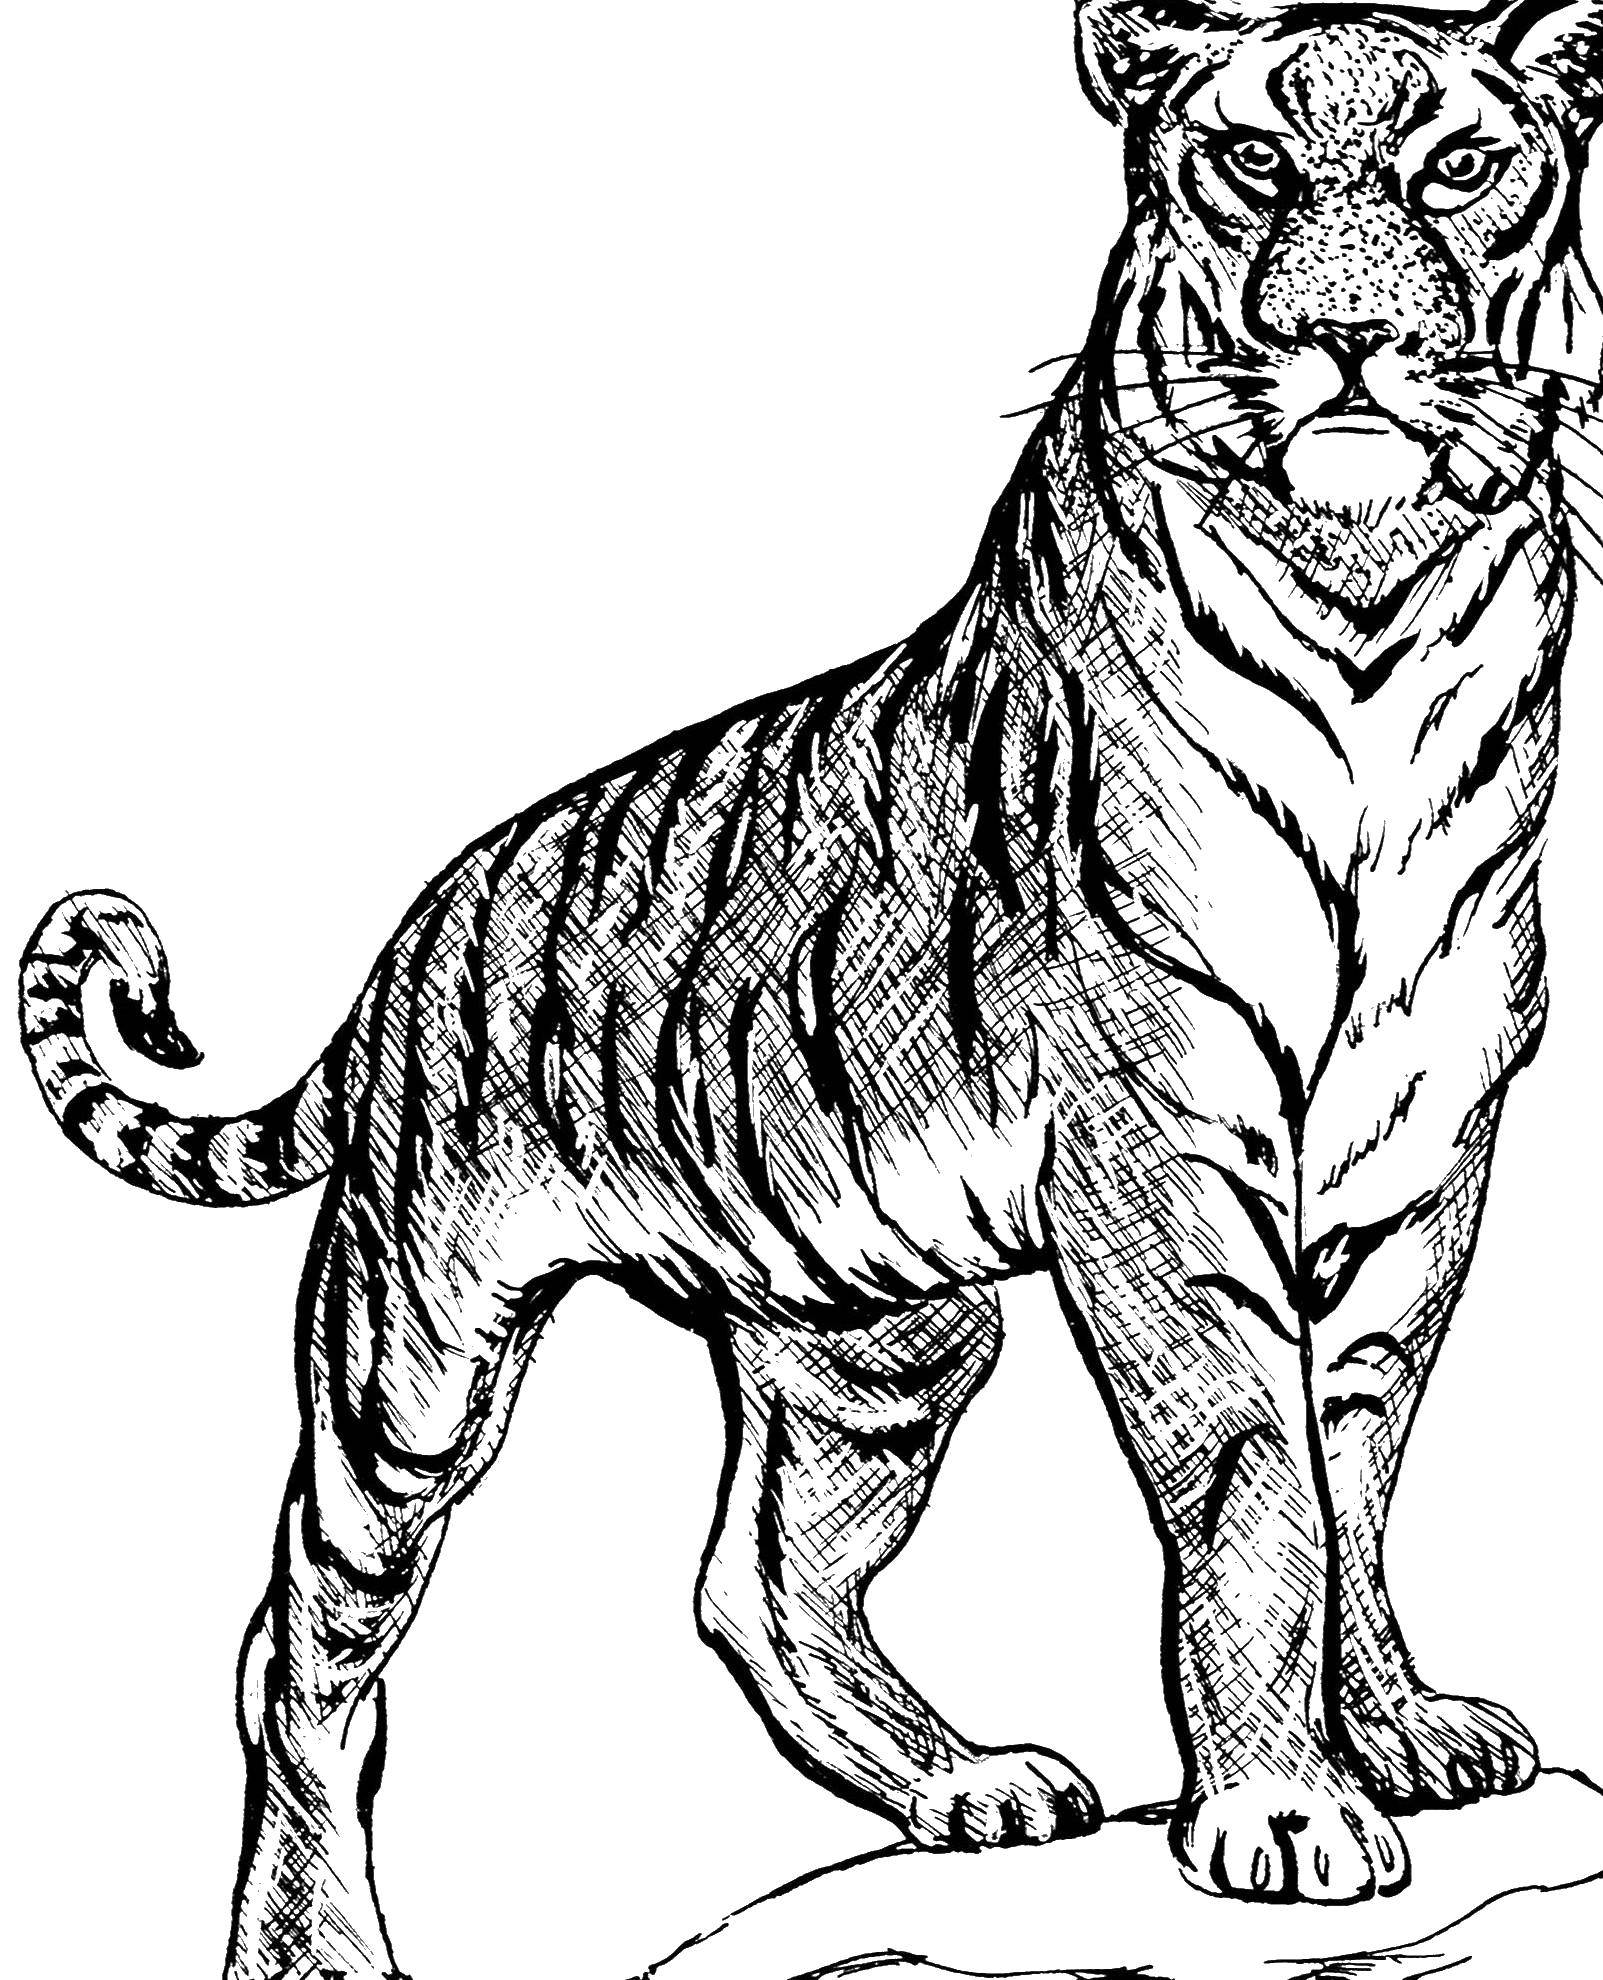 Coloring Tiger. Category Animals. Tags:  animals, tiger, tigers.